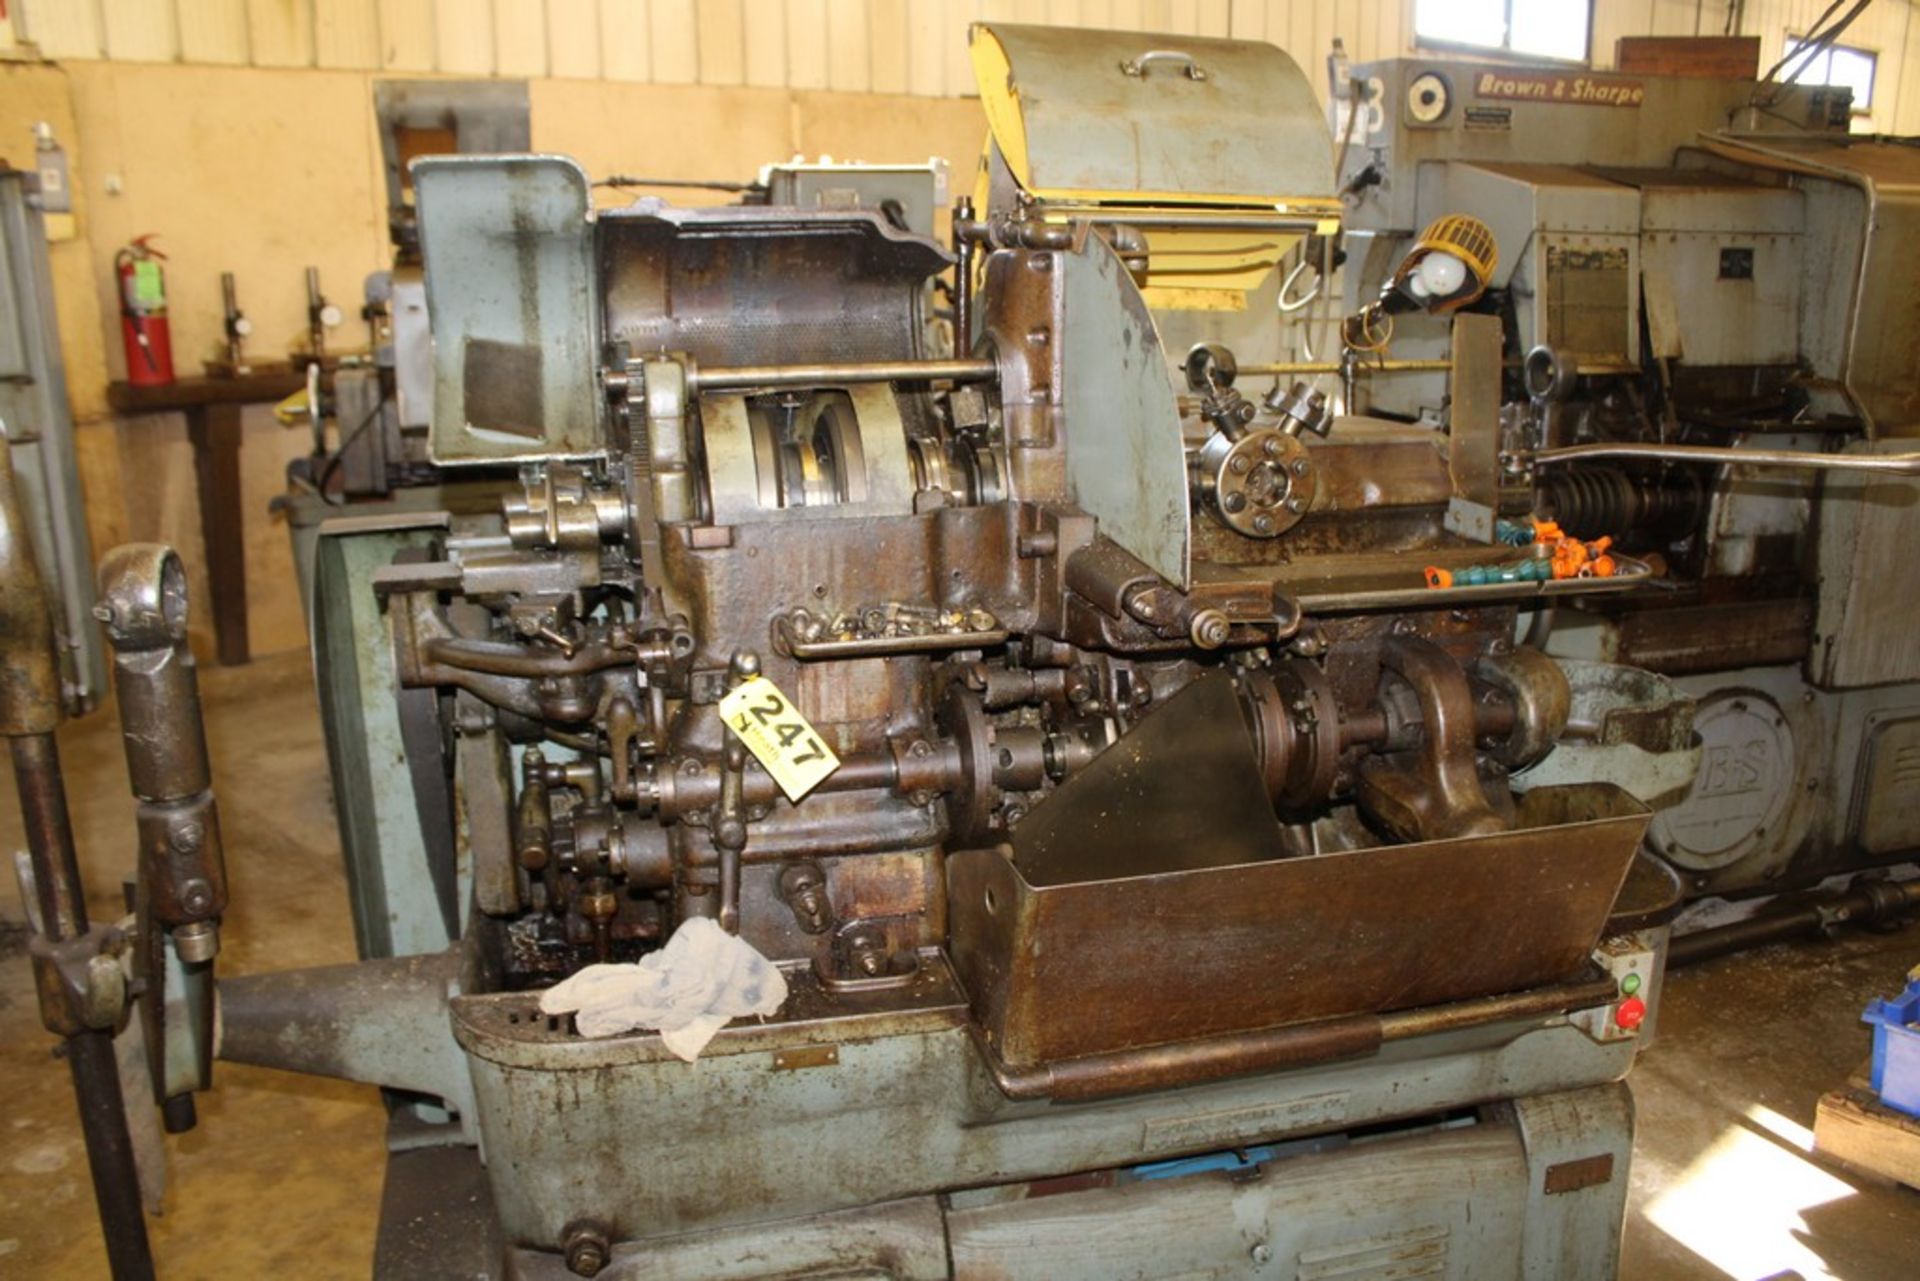 BROWN & SHARPE 1-1/2" NO. 2G AUTOMATIC SCREW MACHINE, S/N 12688, WITH VERTICAL SLIDE